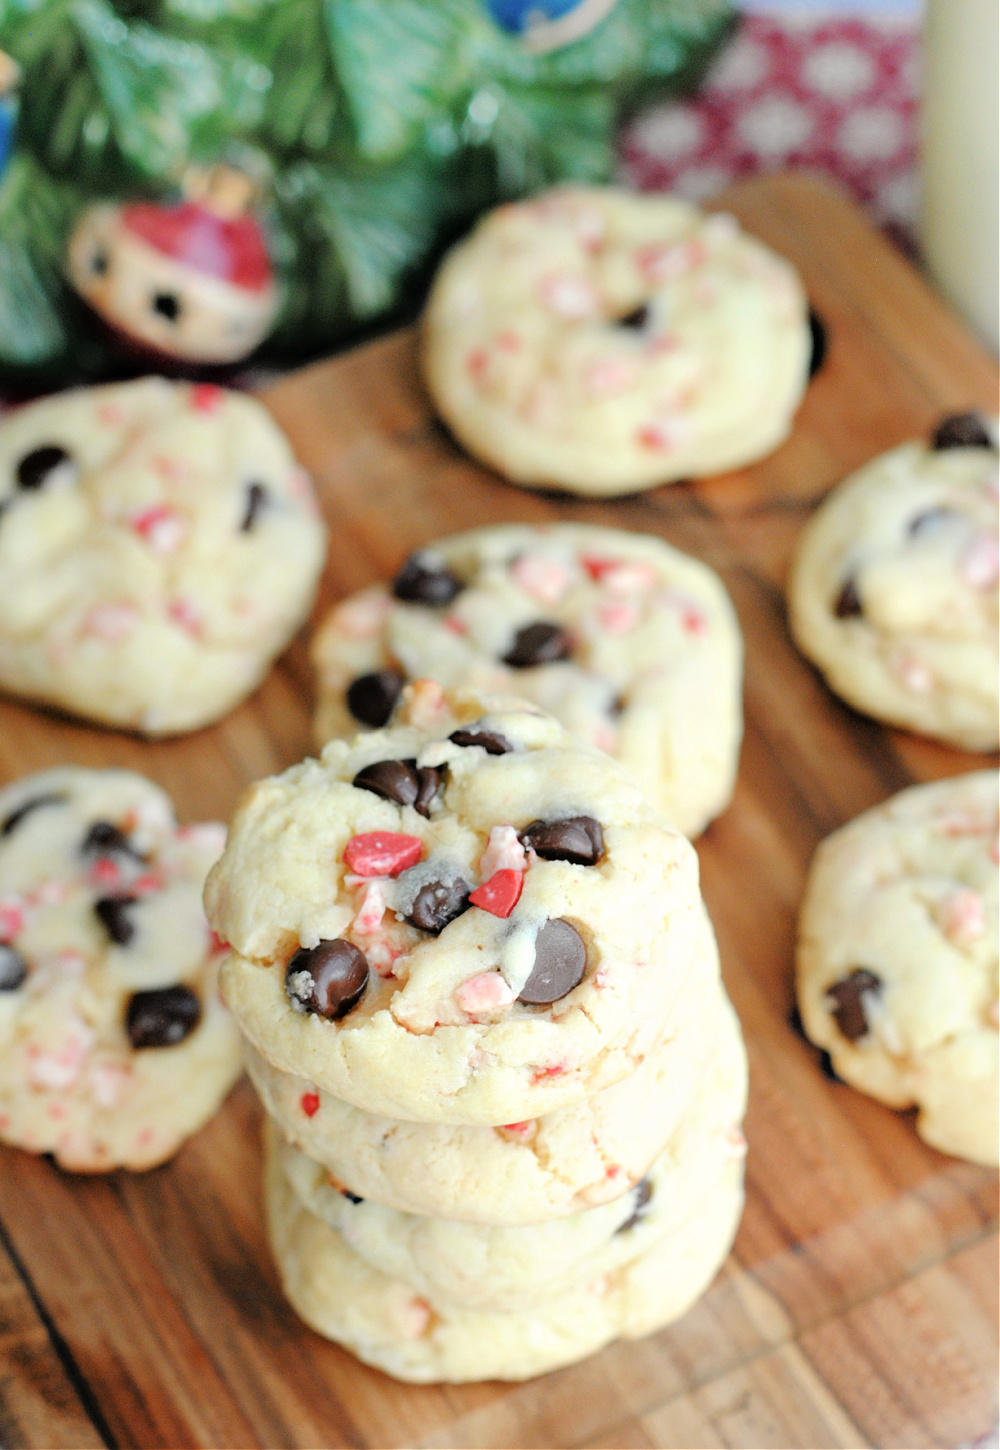 Cake Mix Peppermint Chocolate Chip Cookies Recipe